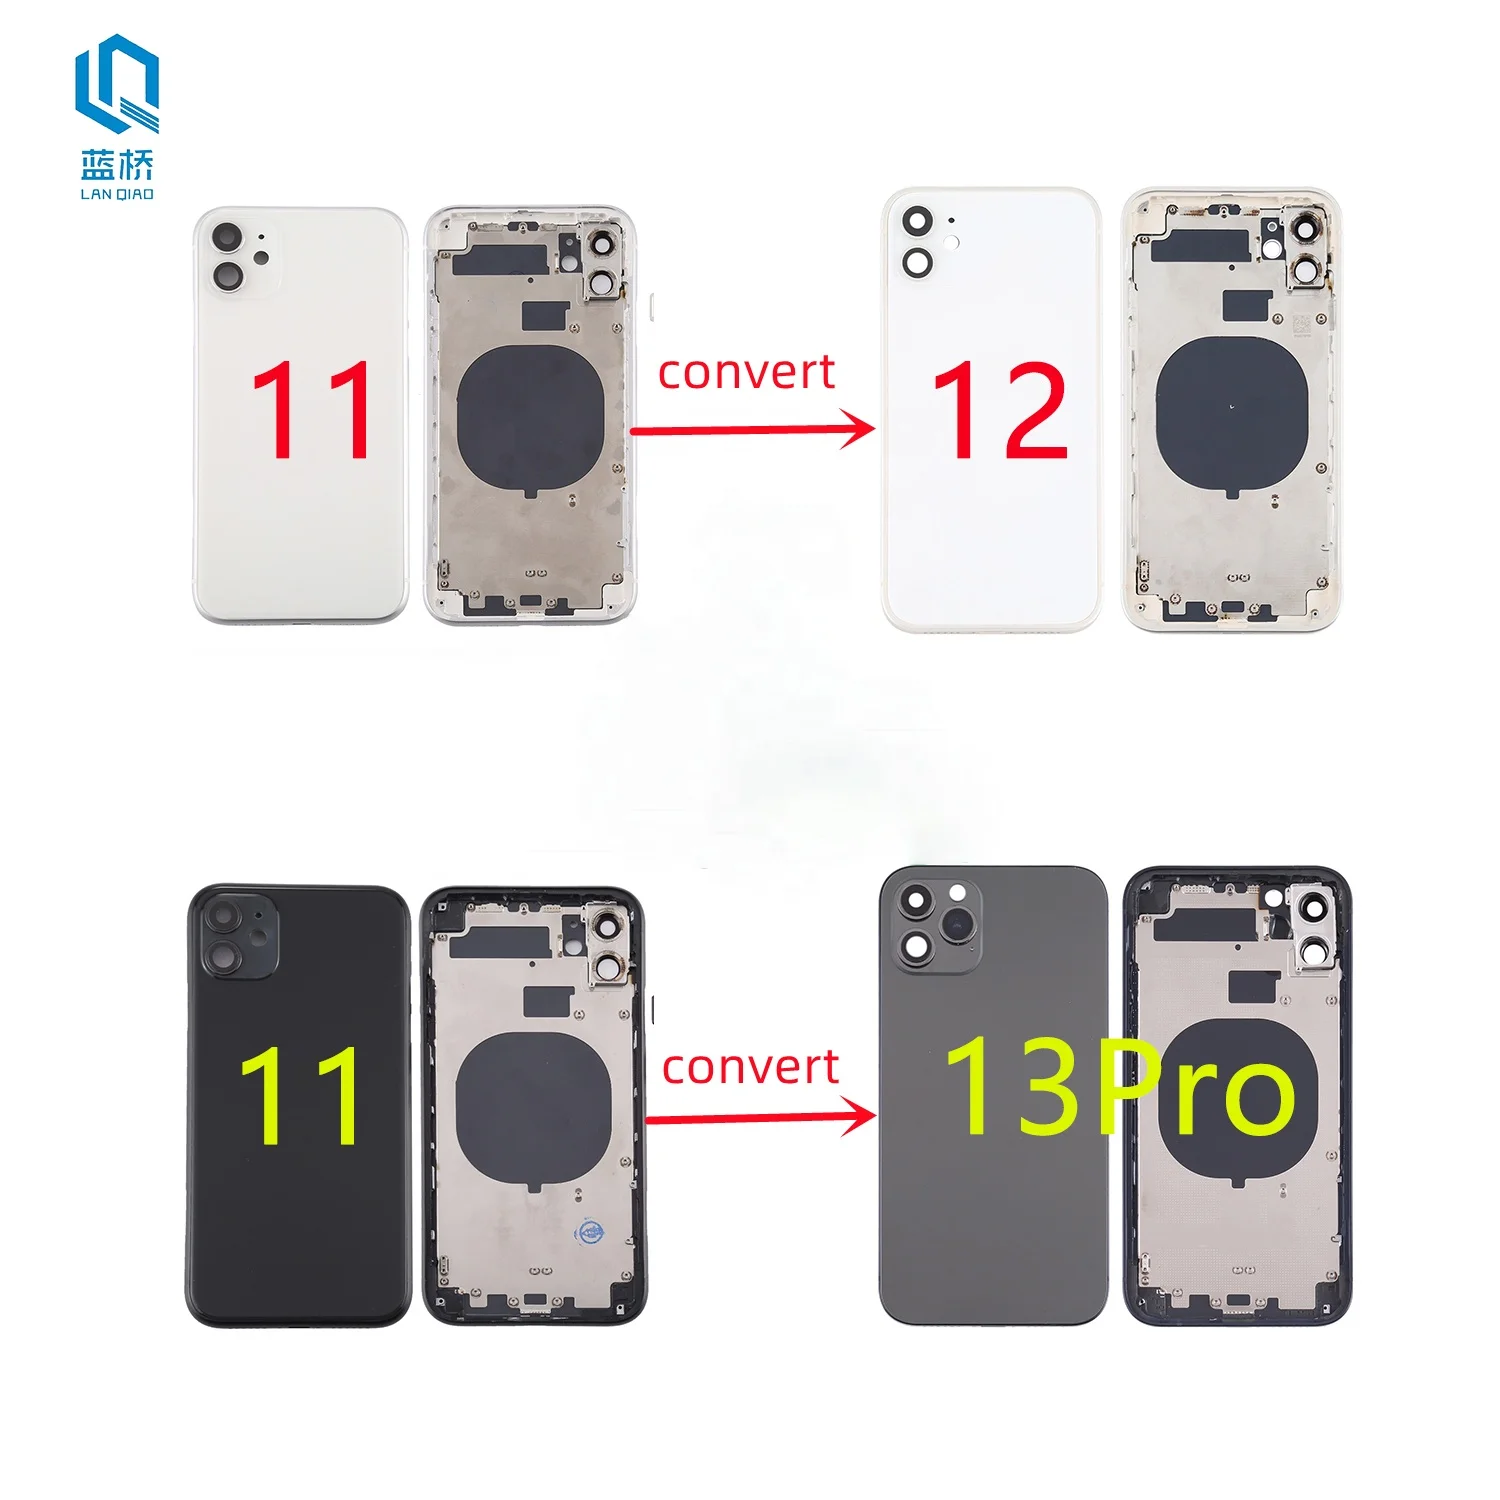 High quality Back Housing for iPhone X Convert to 12 Pro 13 Pro XR 11 to 12 13 Upgrade XS Max Like 12 Pro Max Back Glass Body